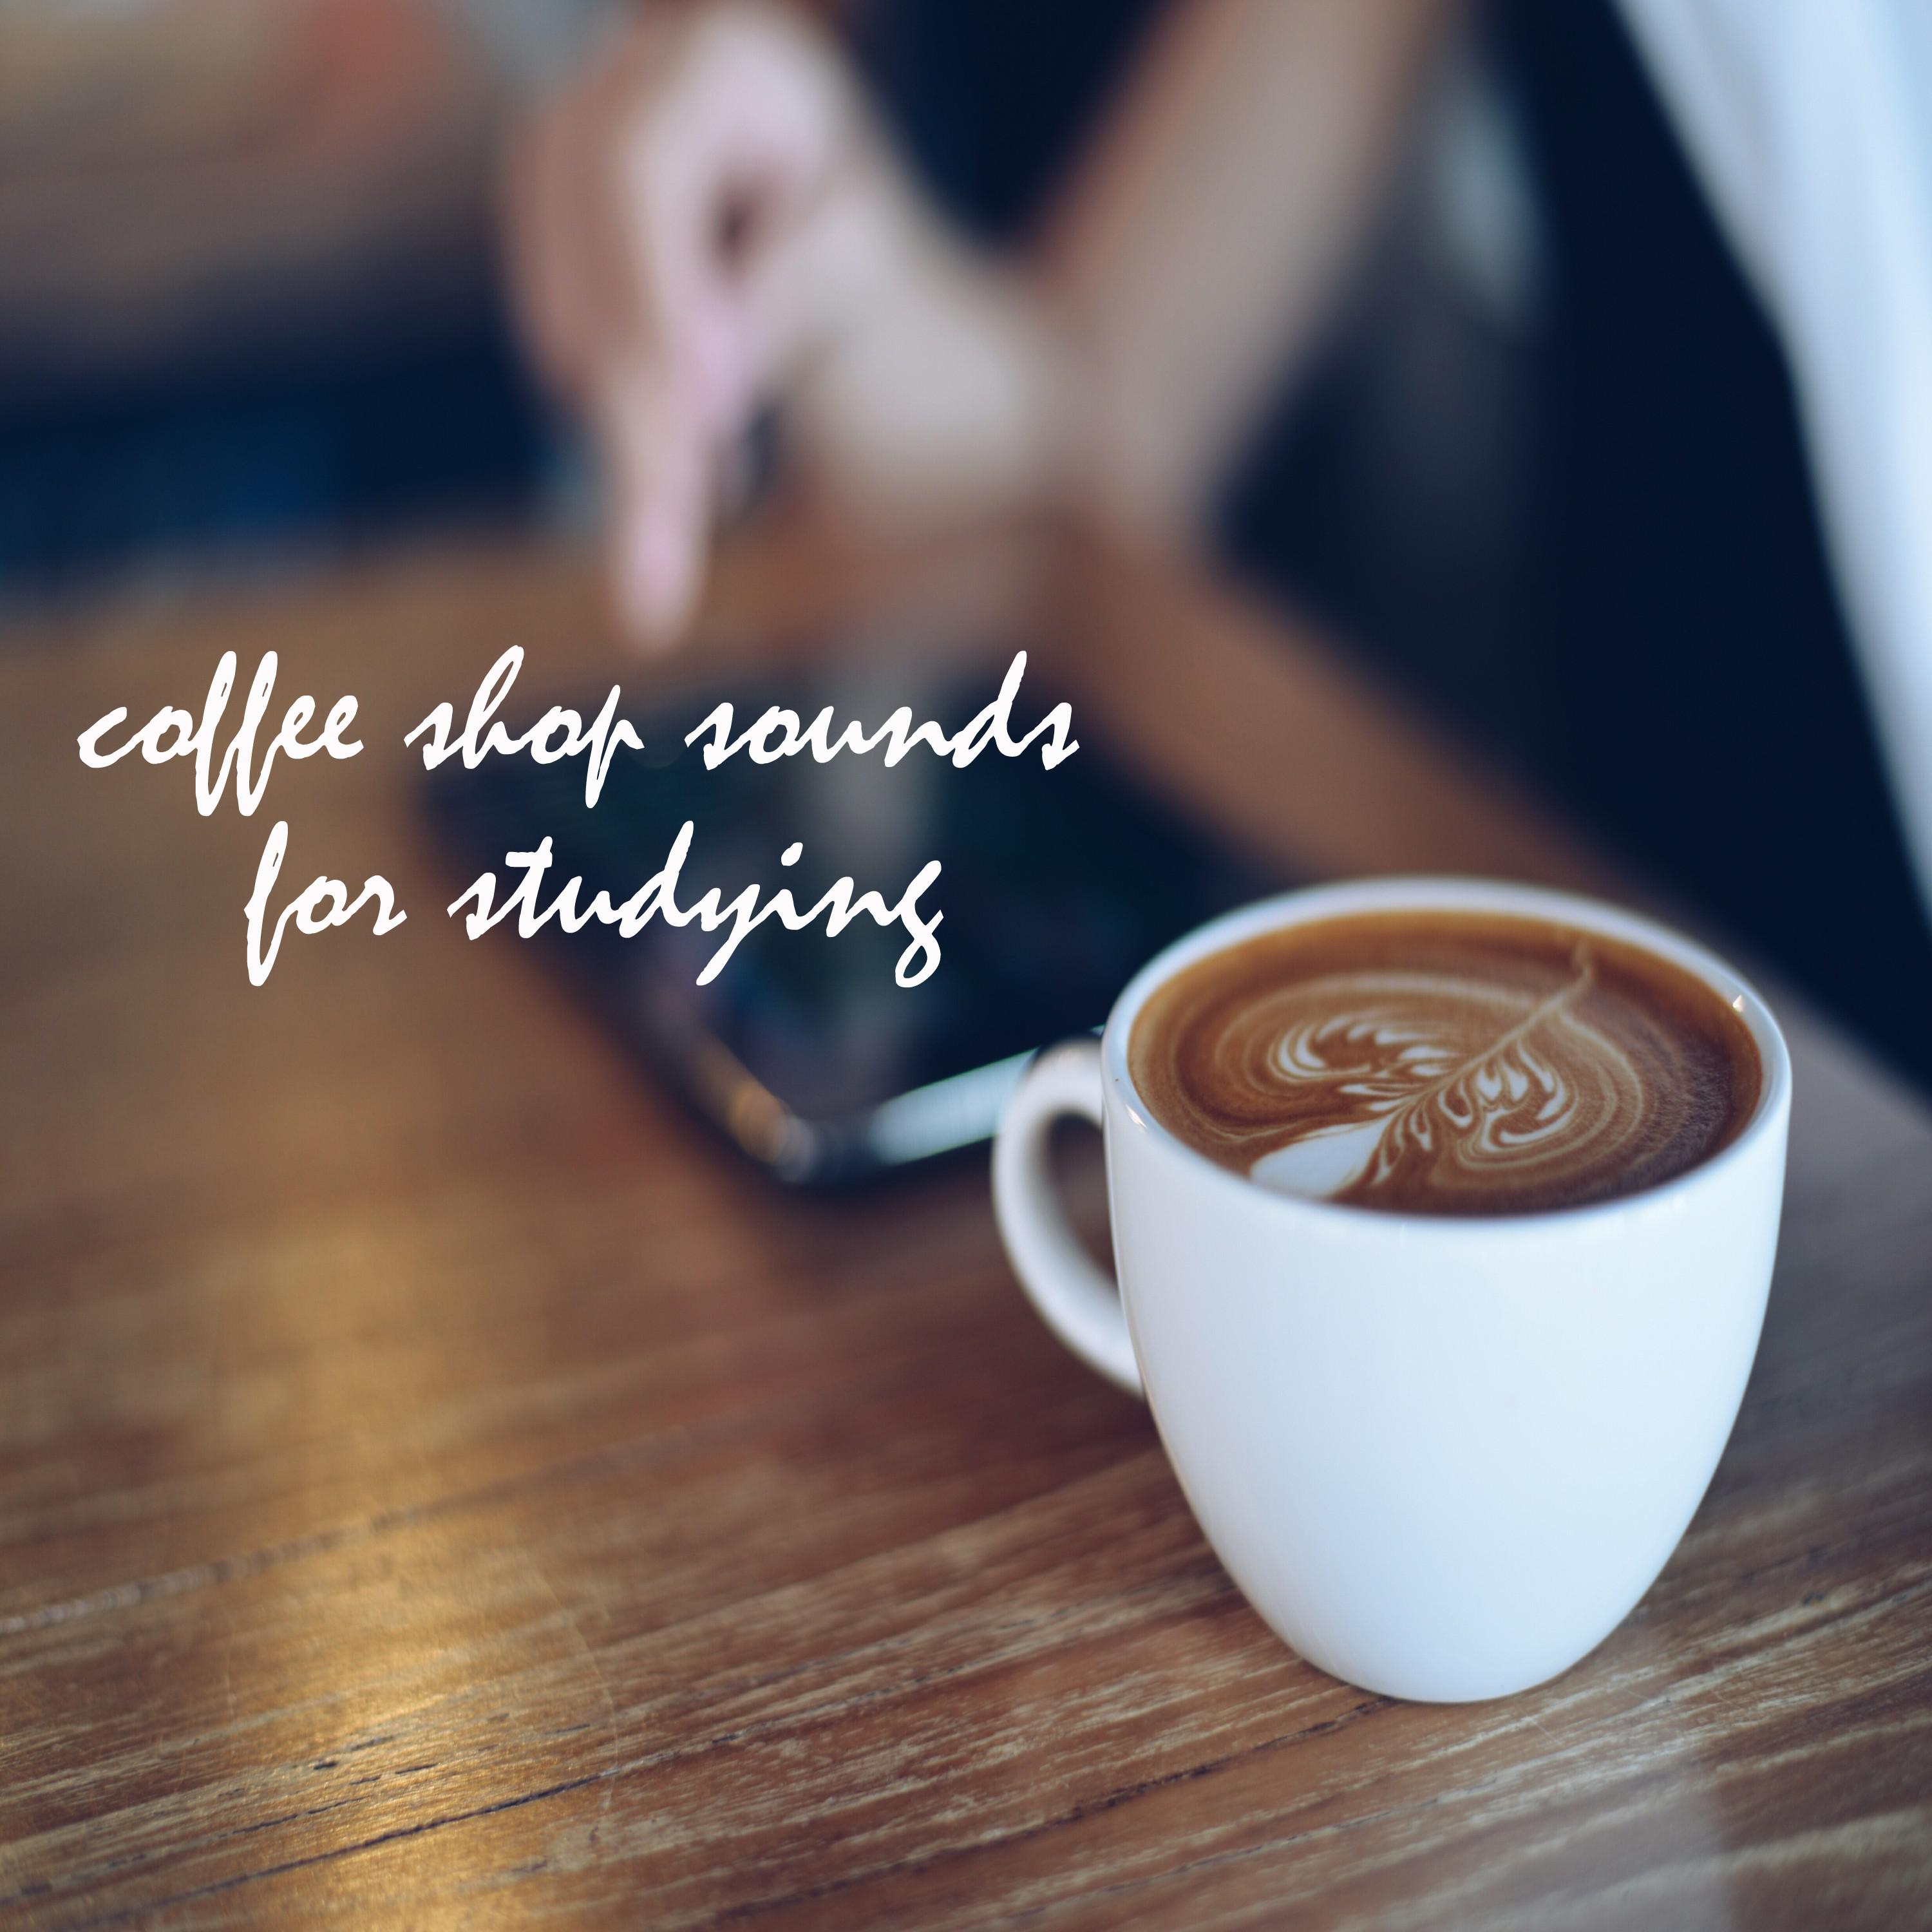 Coffee Shop Sounds for Studying and Working, Pt. 56